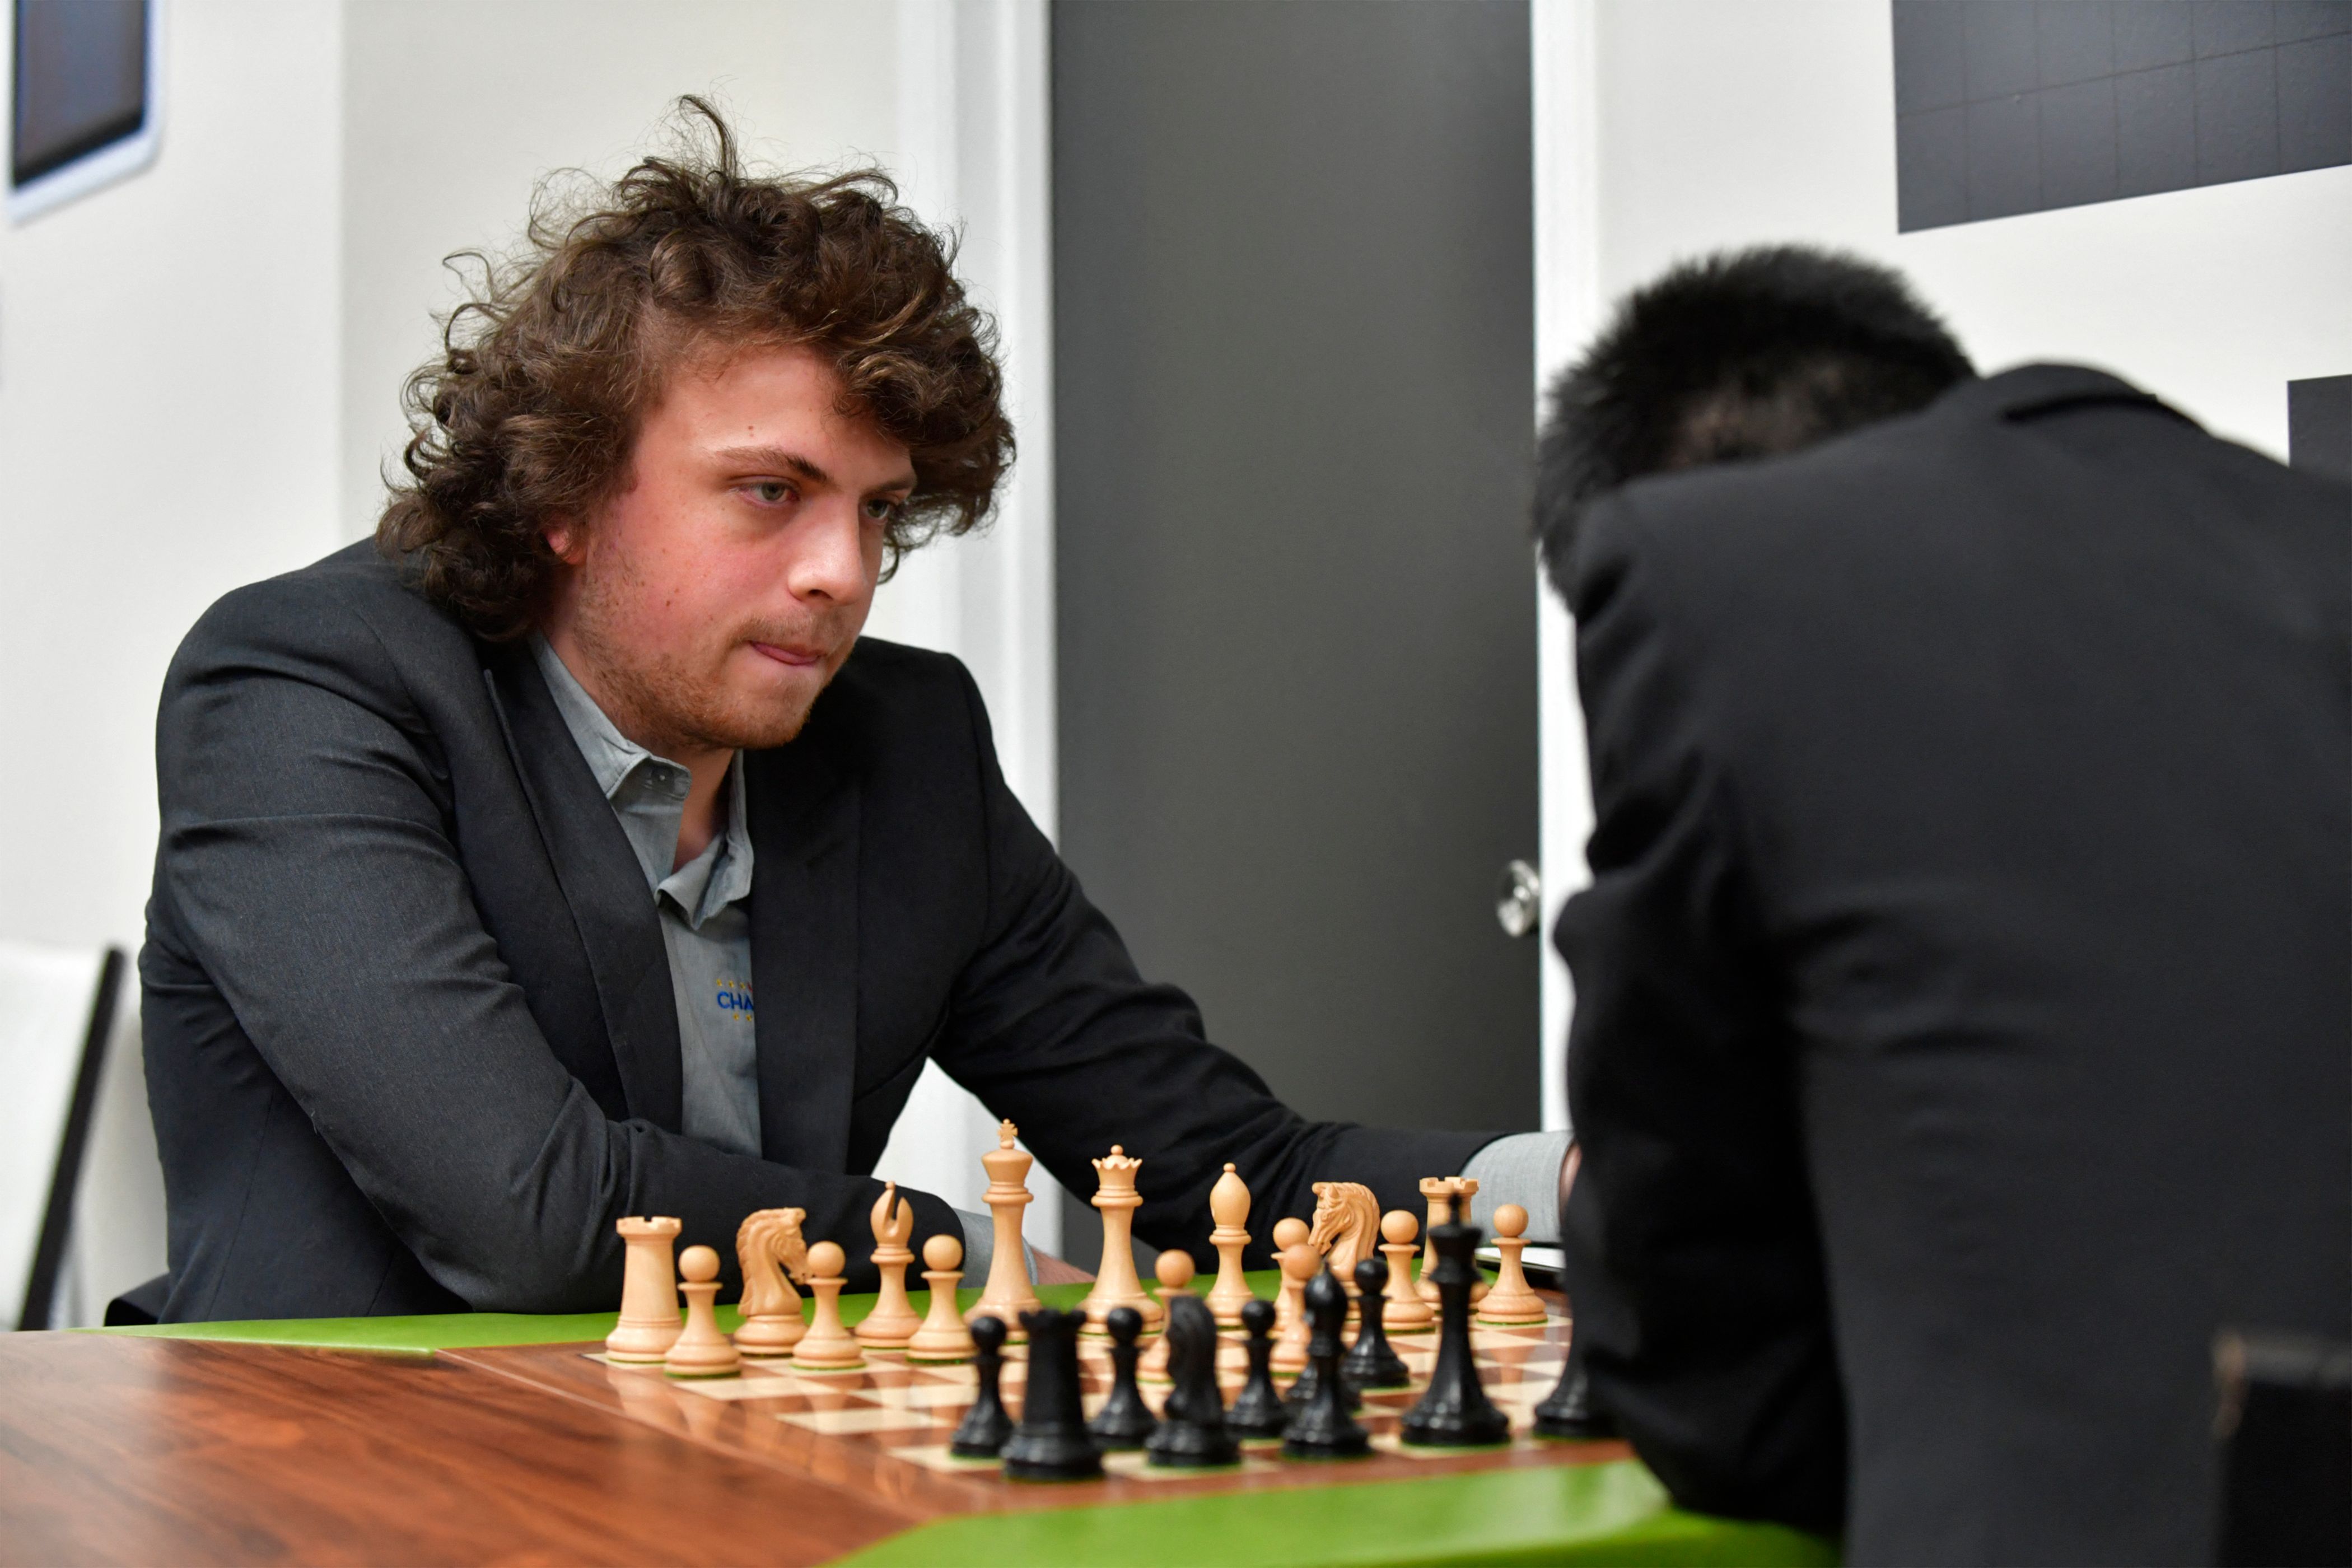 &nbsp;US international grandmaster Hans Niemann waits his turn to move during a second-round chess game against Jeffery Xiong on the second day of the Saint Louis Chess Club Fall Chess Classic in St. Louis, Missouri, on October 6, 2022. (from getty)